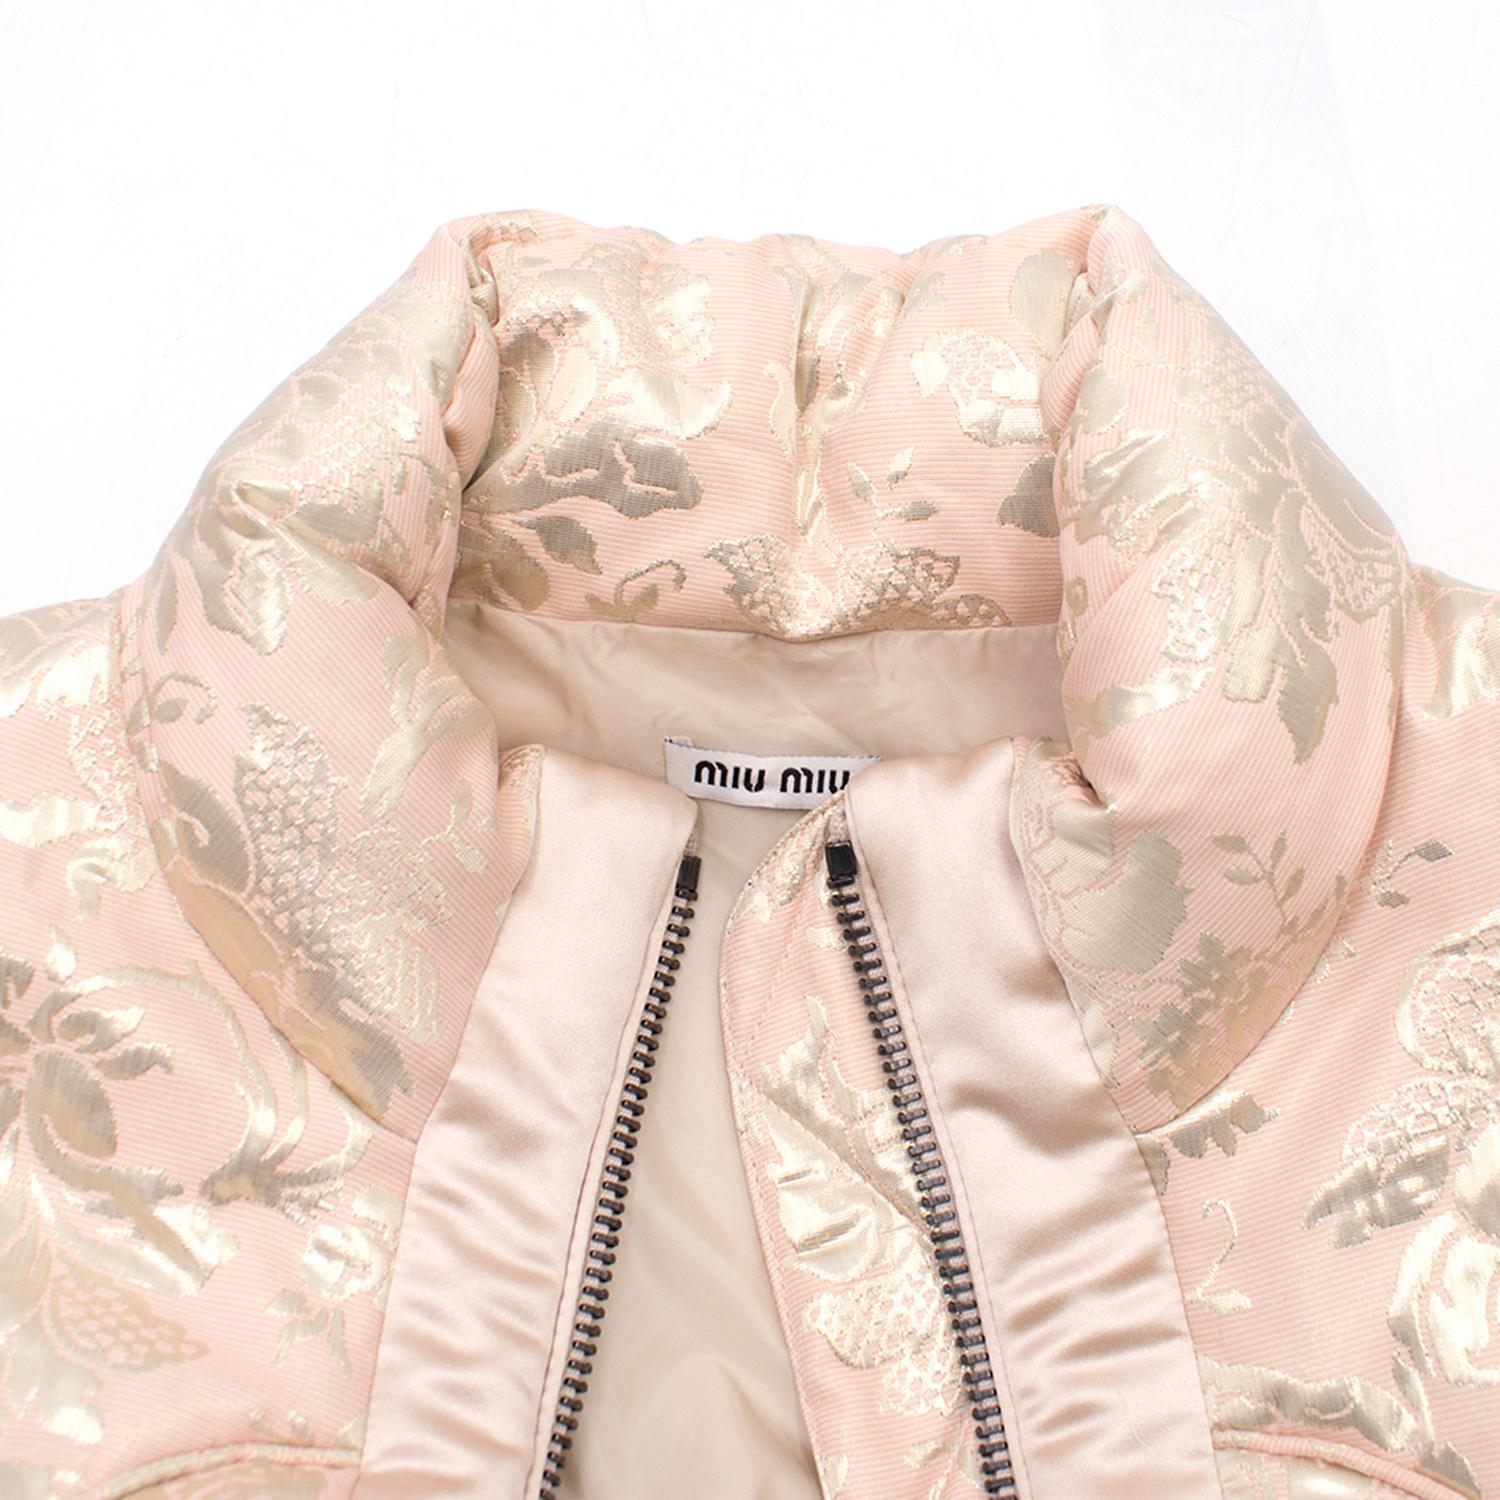 Miu Miu Pink Cropped Floral Jacket

-Pink puffer jacket with gold floral pattern
- Acetate blend
-Cropped
-Quilted
-Two front pockets
-Elasticated cuffs
-Gun metal toned zip
-Waterproof interior belt with poppers

Sizing:
Italian size